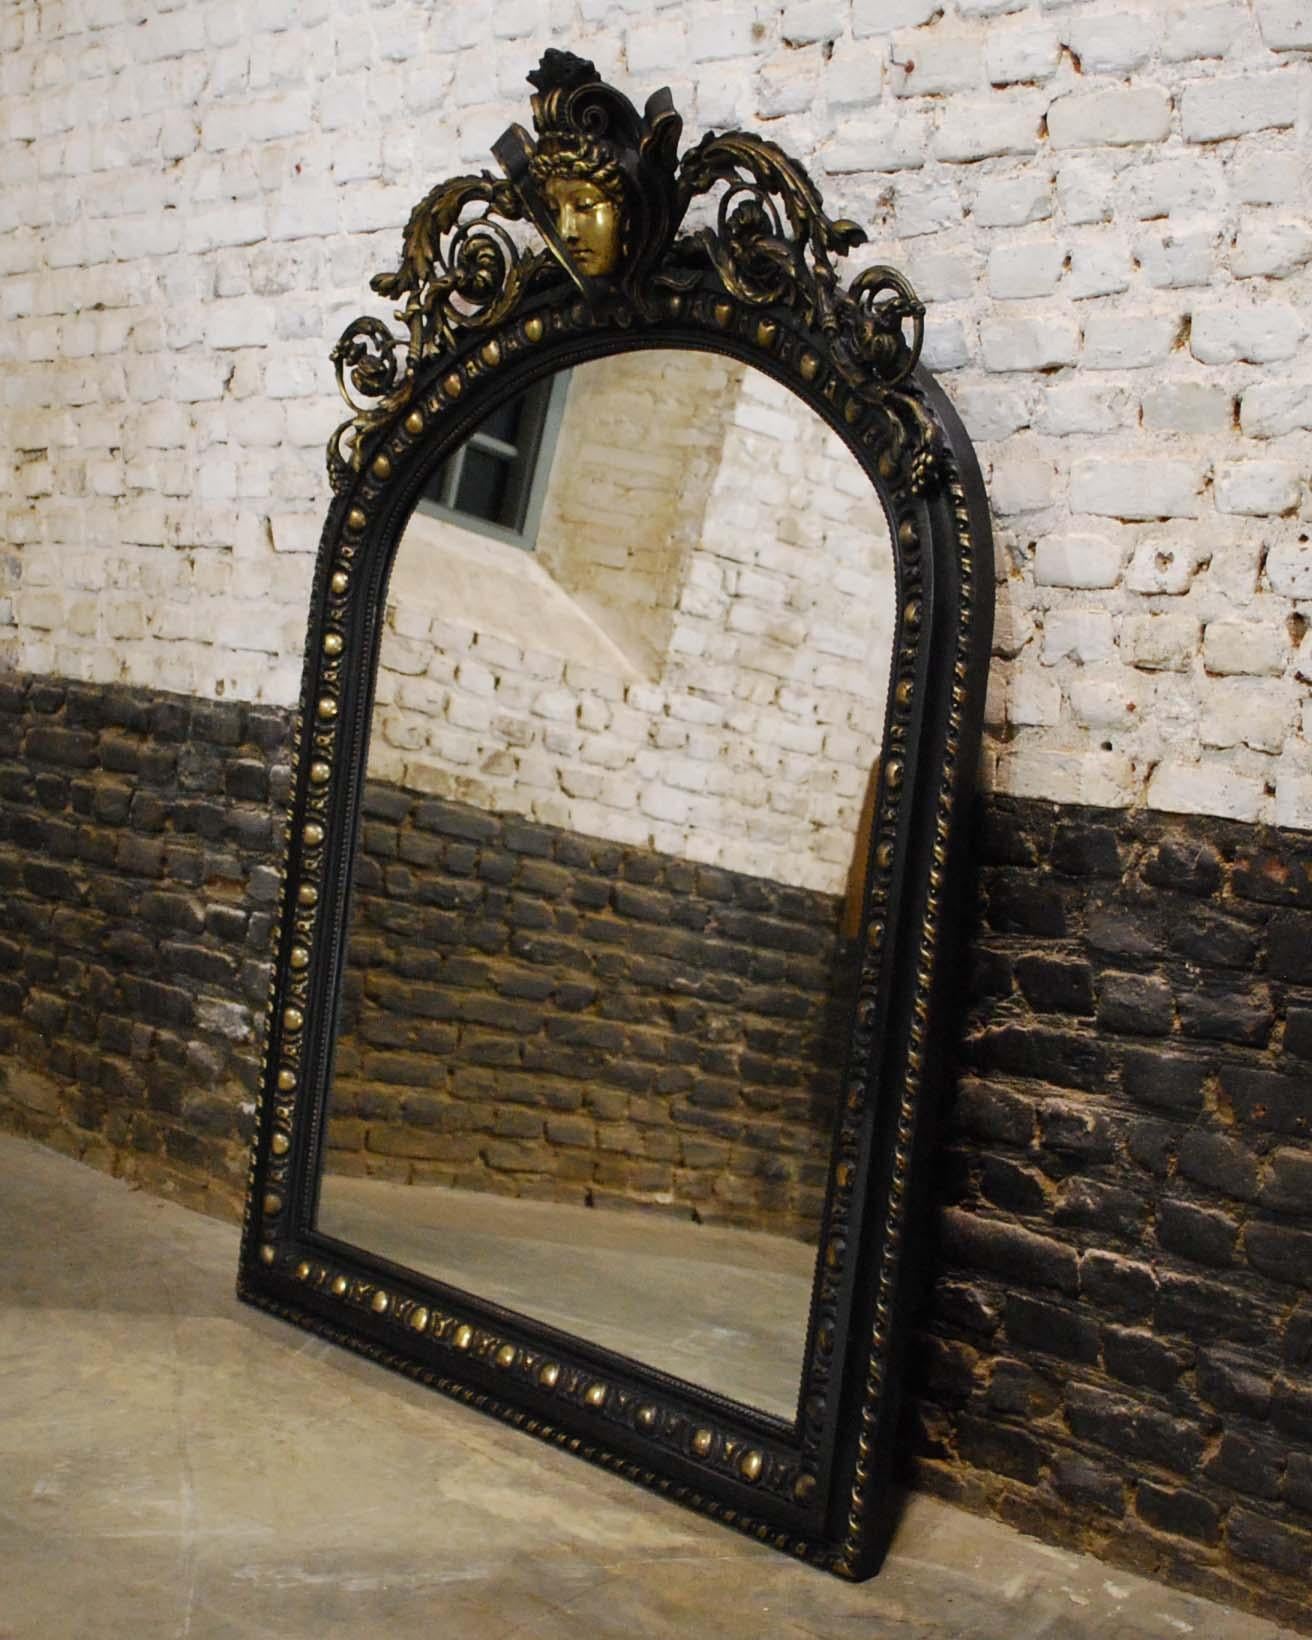 An antique French mirror made in the ancient European Renaissance style. 
The frame has a gadrooned edge and pearl beading surrounding the glass. The arched top is decorated with a central positioned serene women's head flanked by elegant